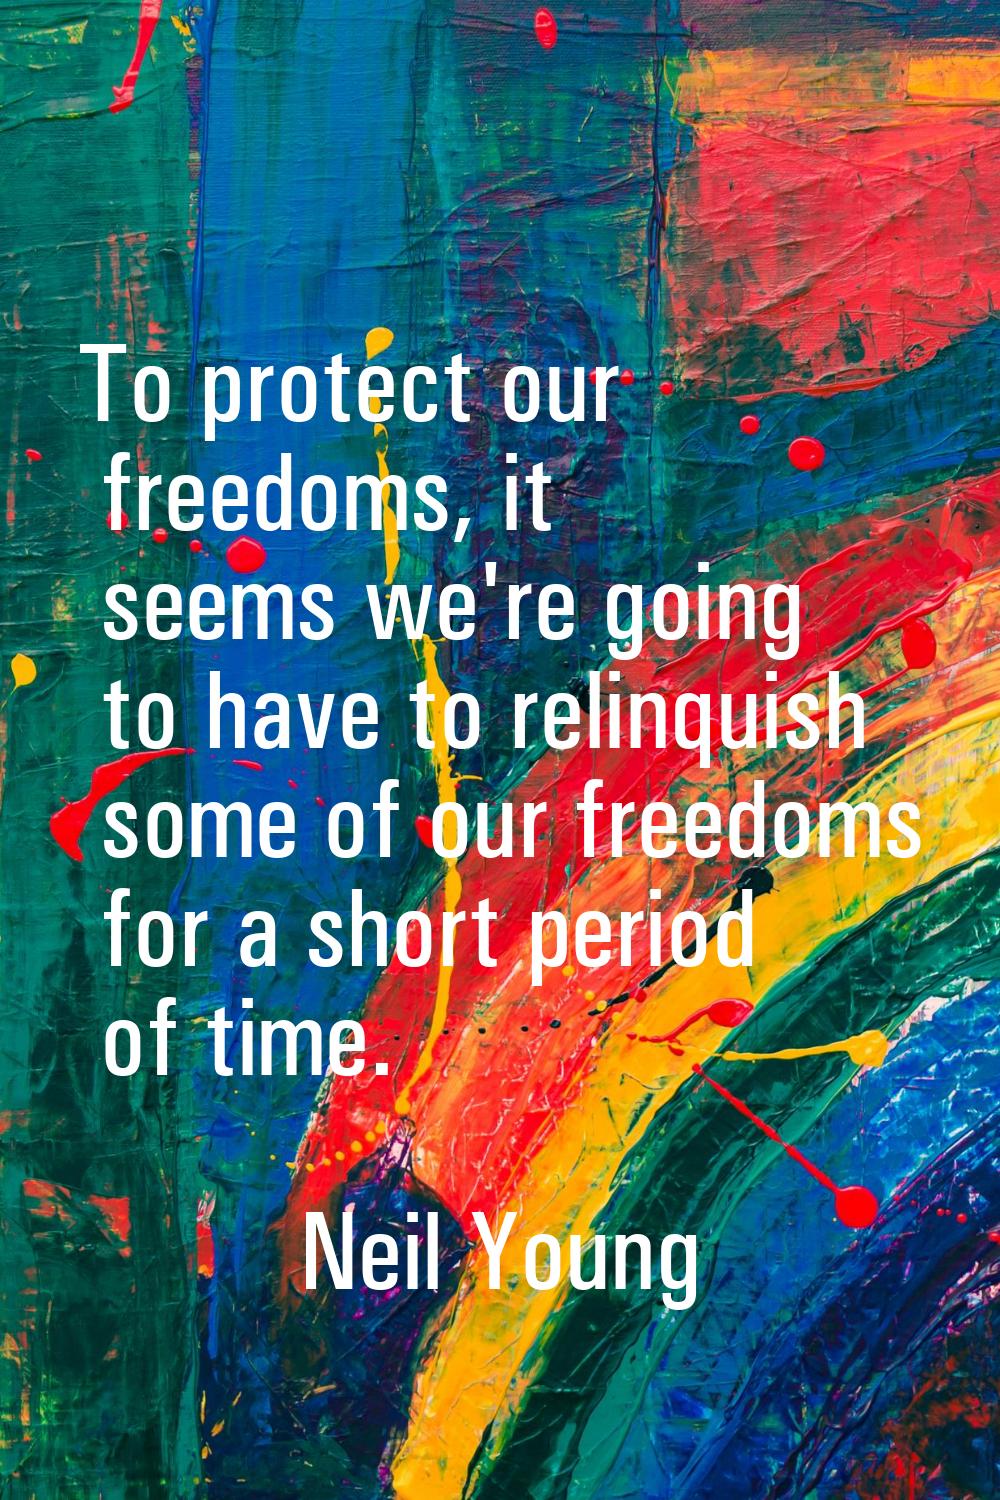 To protect our freedoms, it seems we're going to have to relinquish some of our freedoms for a shor